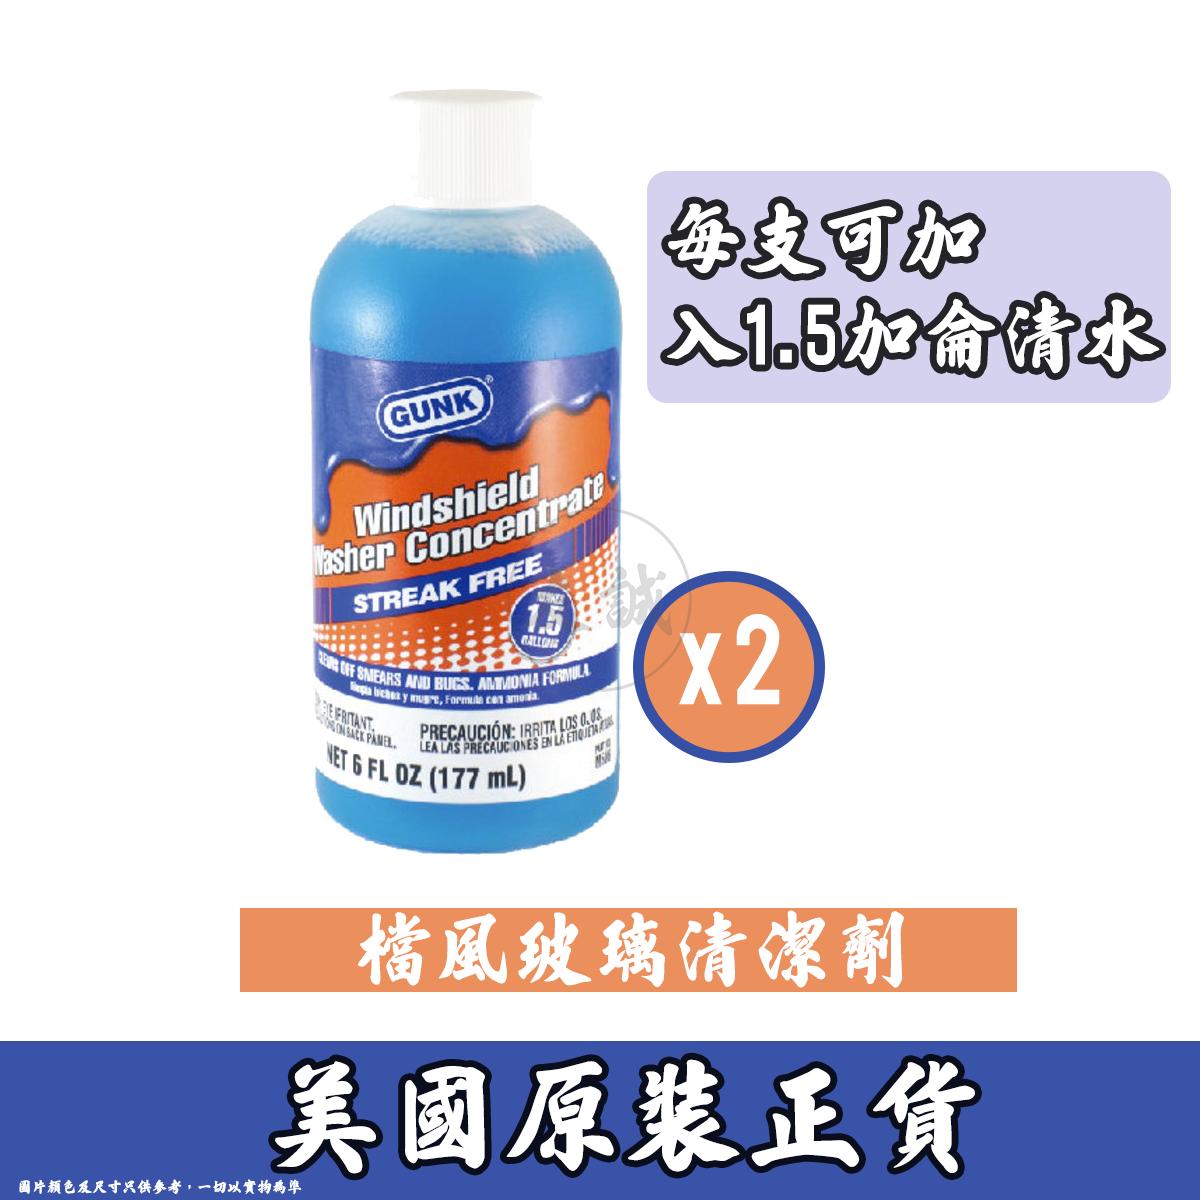 GUNK WINDSHIELD WASHER CONCENTRATED